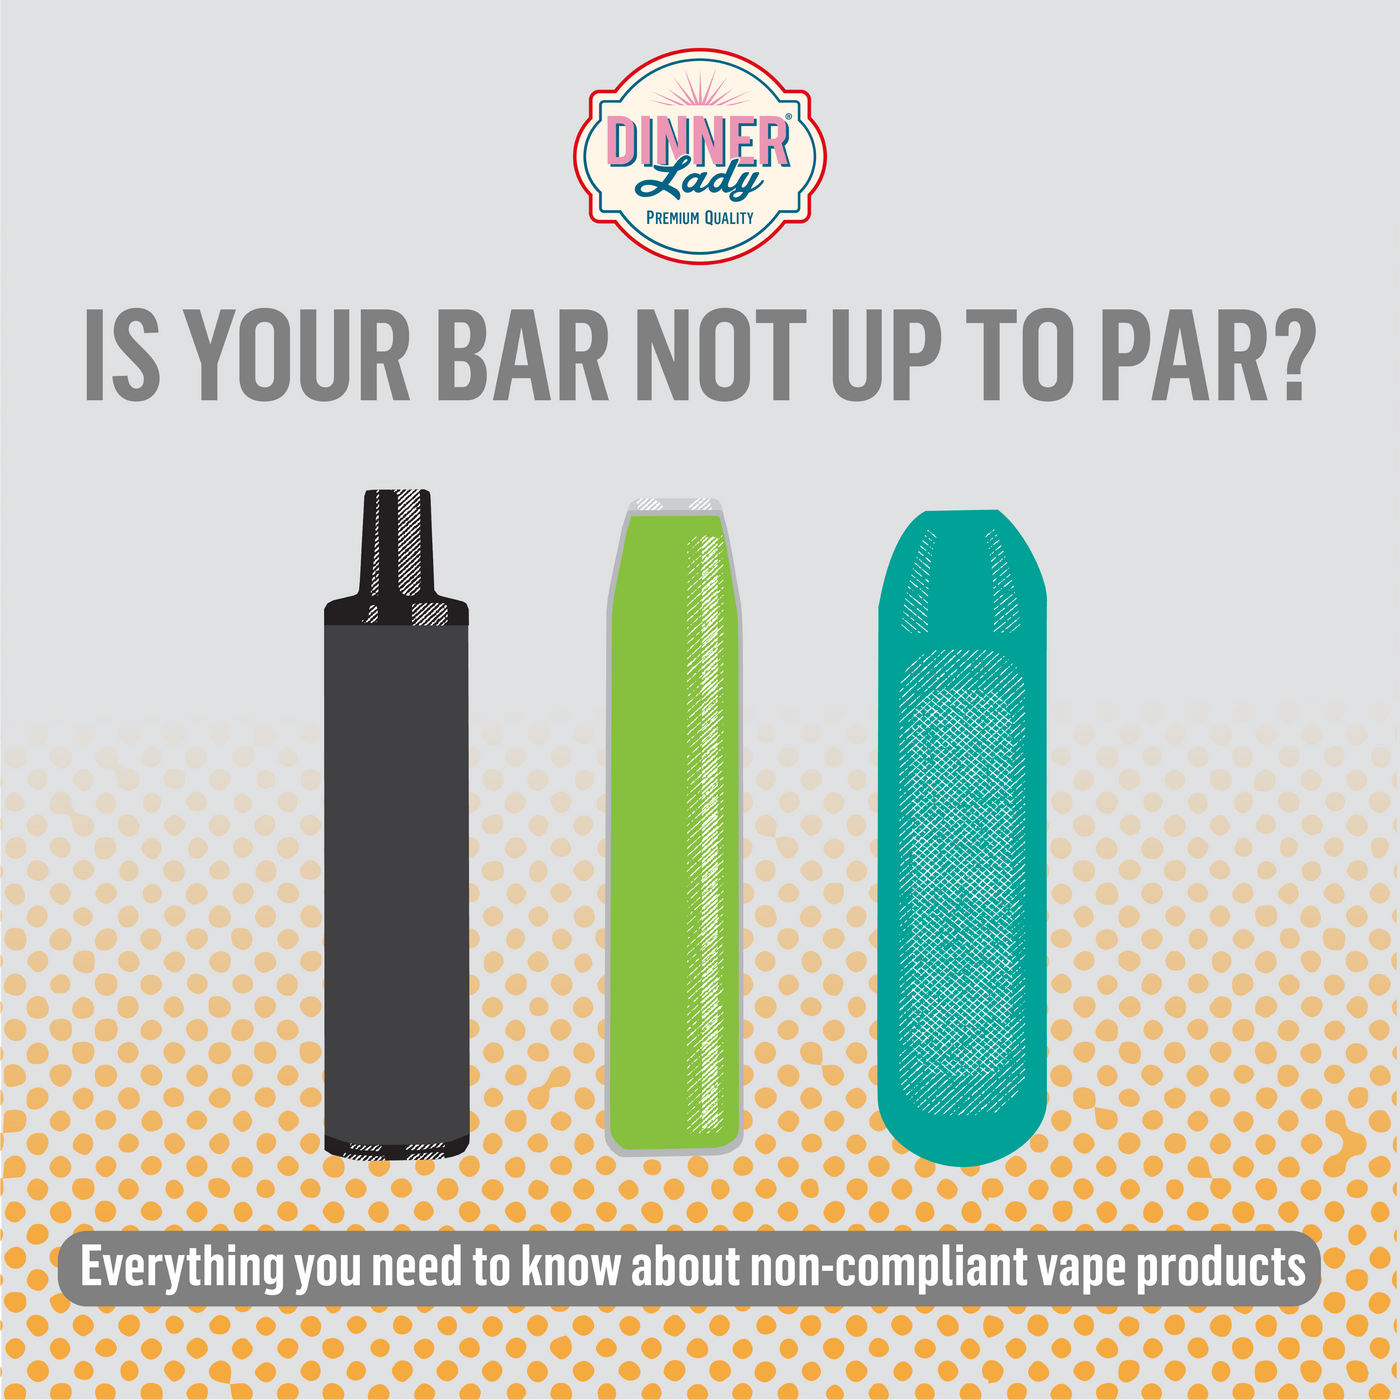 Is your bar up to par? Everything you need to know about non-compliant vape products